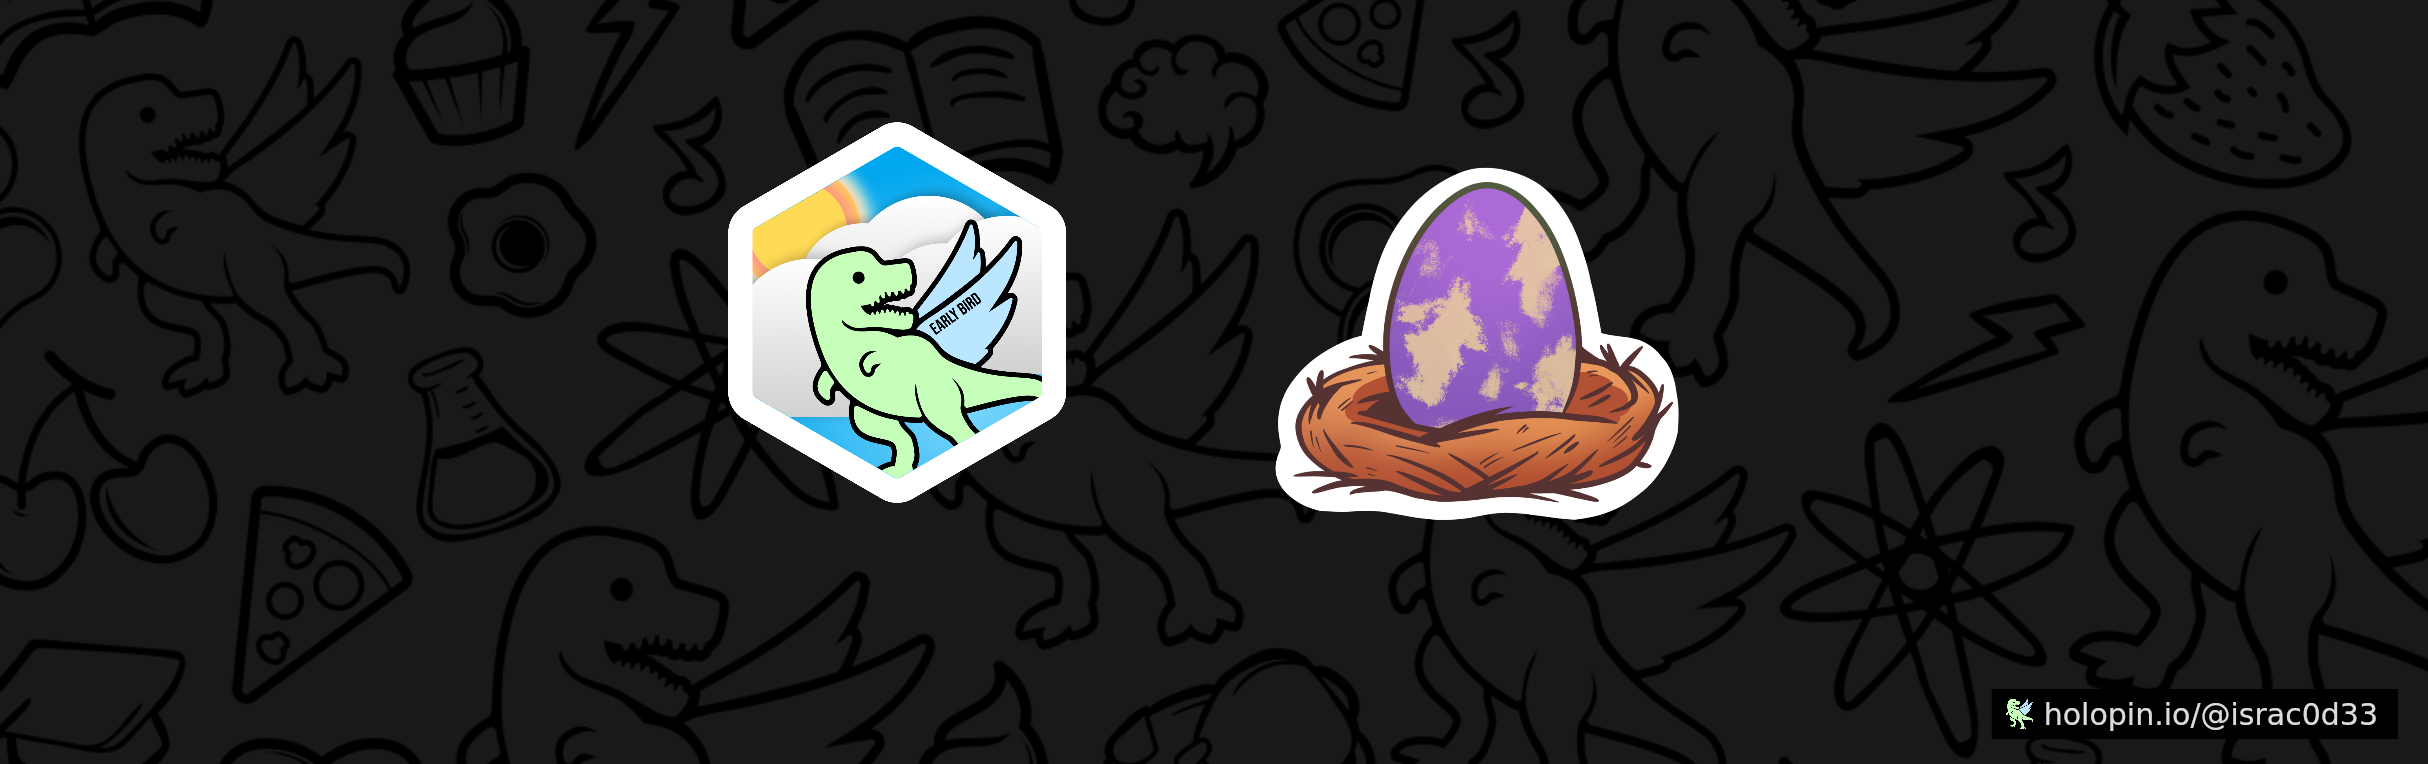 An image of @israc0d33's Holopin badges, which is a link to view their full Holopin profile